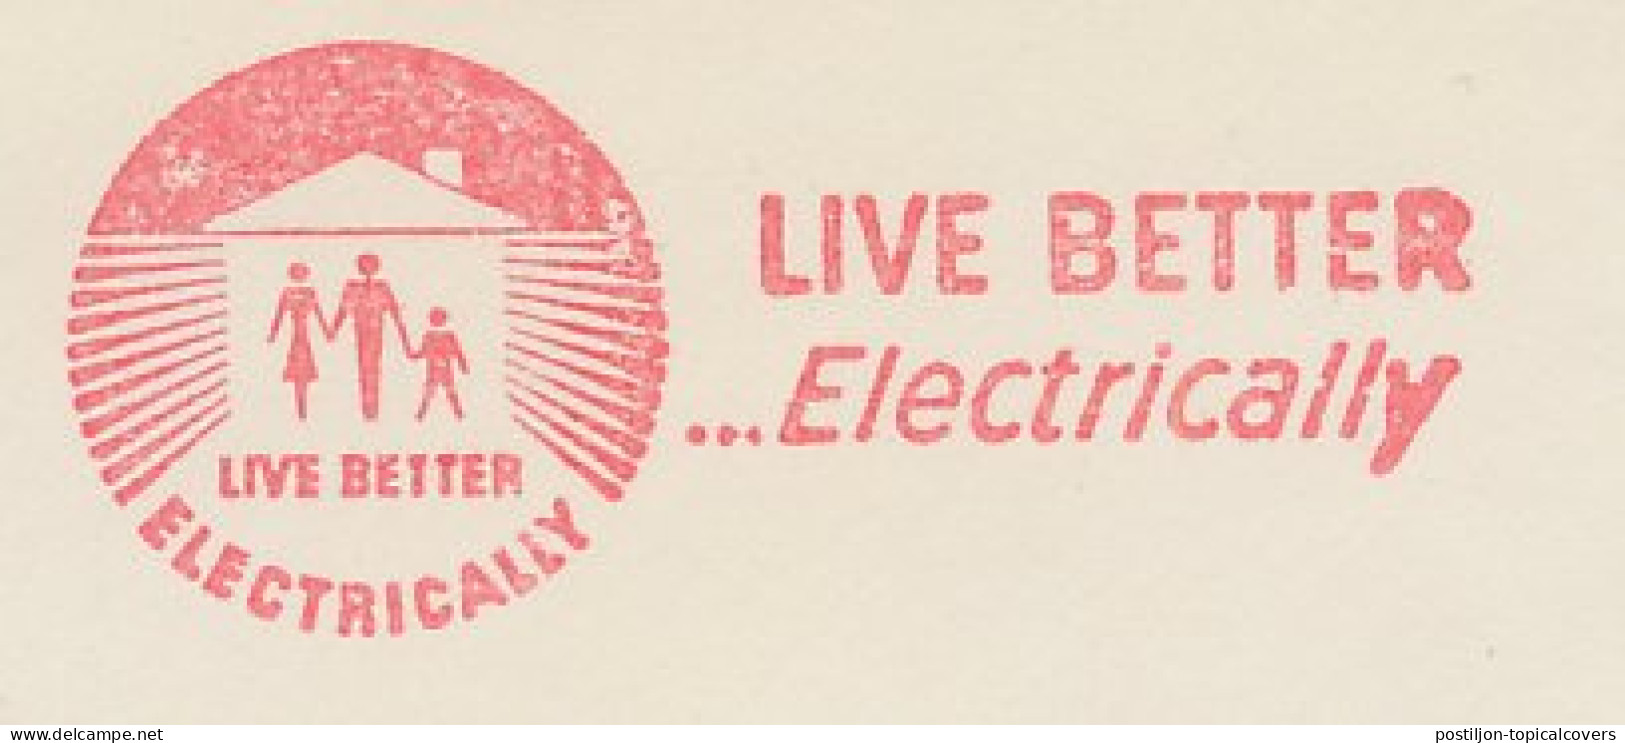 Meter Cut USA 1958 Live Beteer - Electrically - Electricity